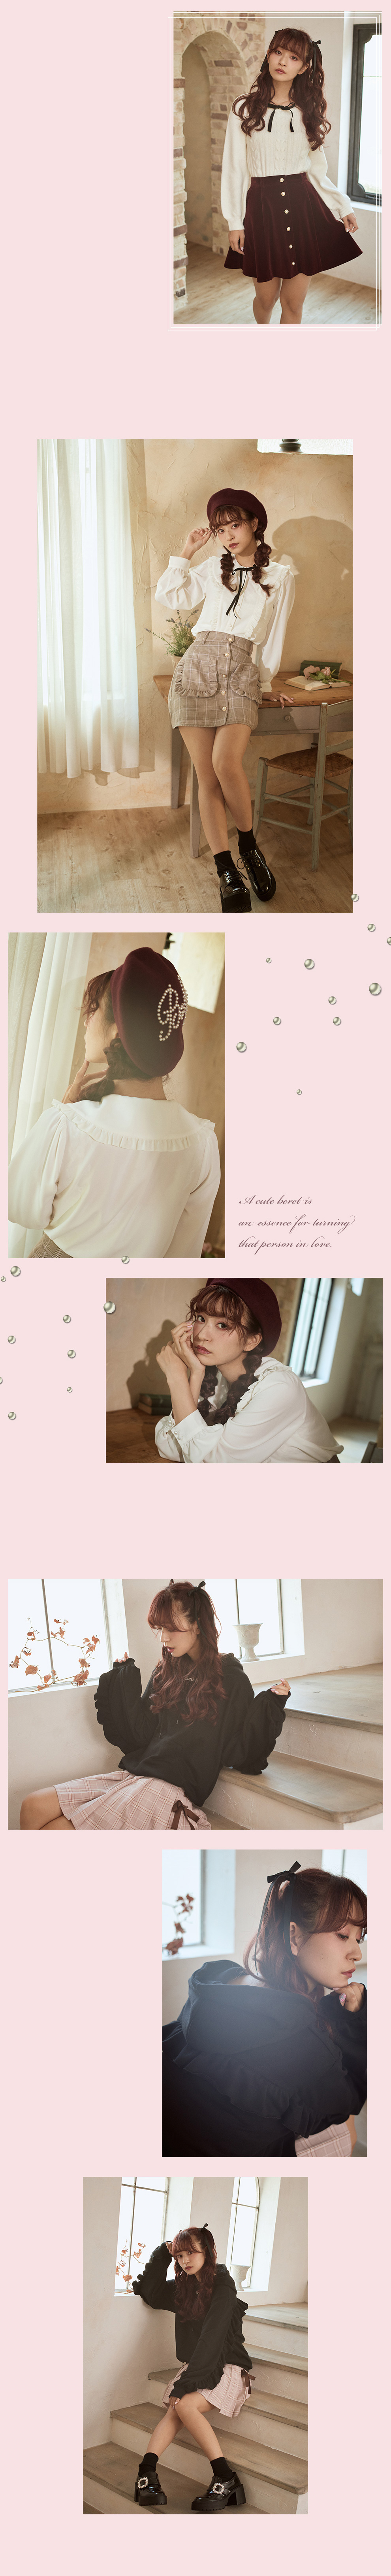 2019 AW Girly Collection Vol.3 『My favorite things』